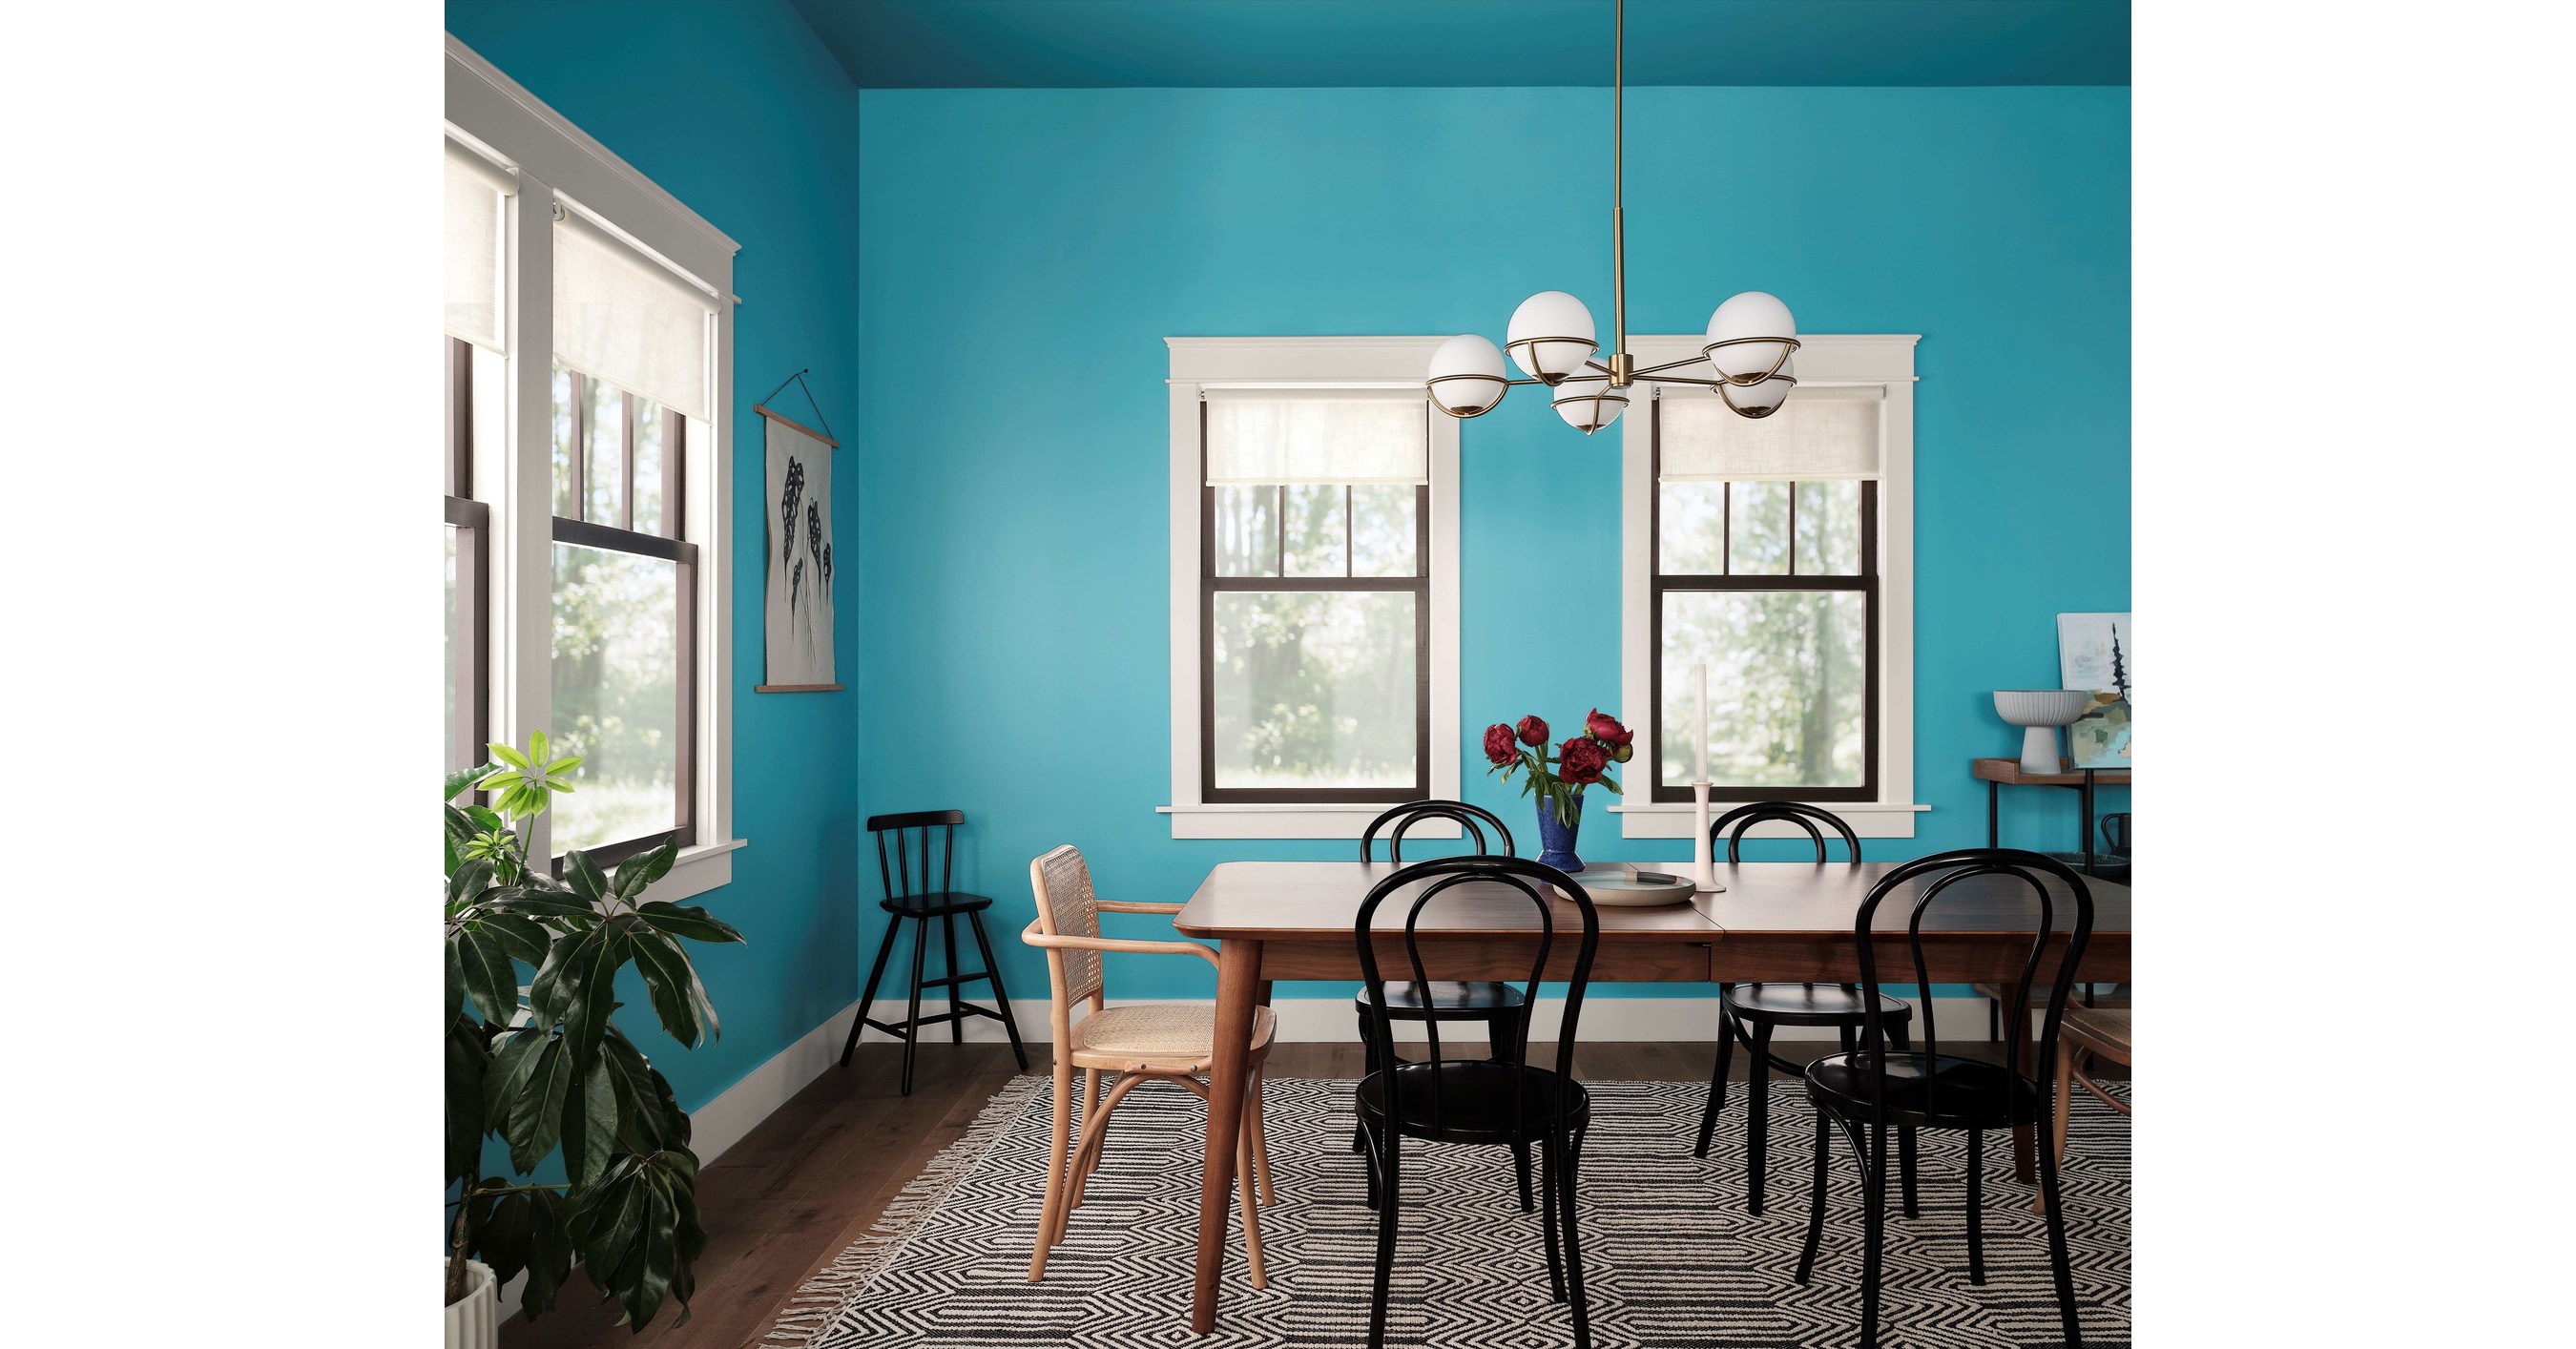 Sherwin Williams Bedroom Colors 2021 - Sherwin Williams Color of the